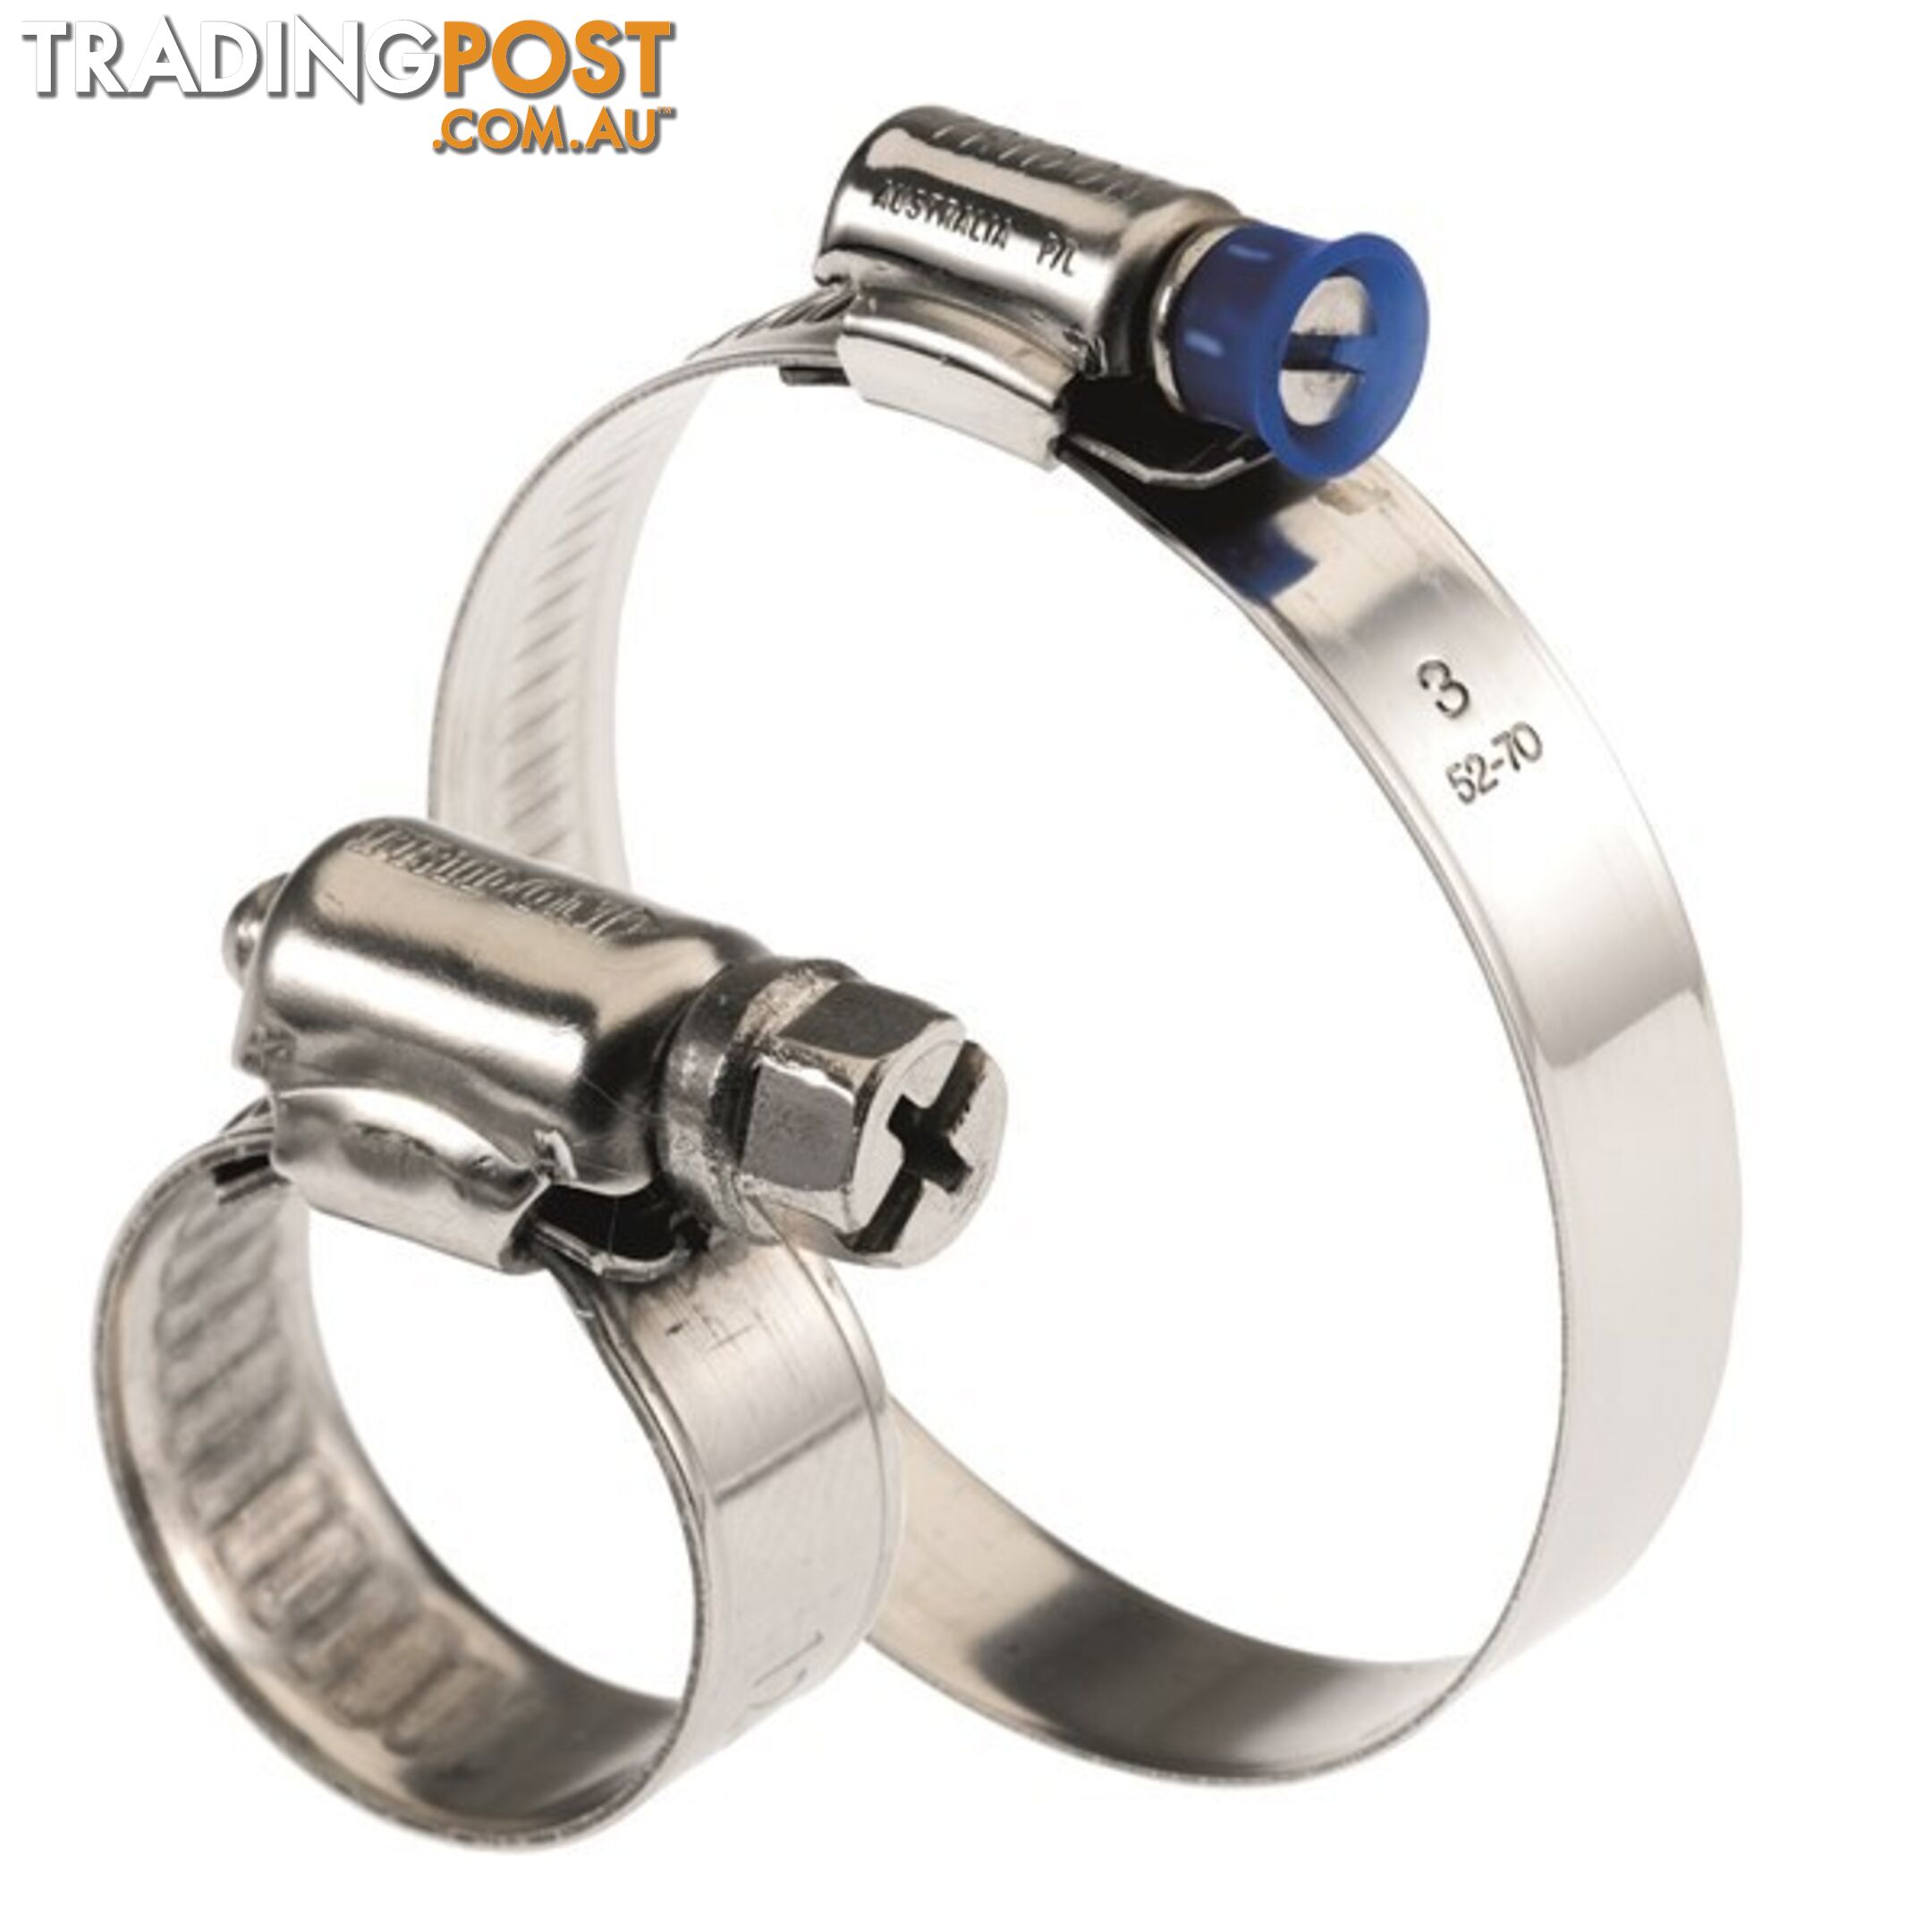 Tridon Hose Clamp 22 -38mm Regular Solid Band Collared Full S. Steel 10pk SKU - SMPC1P